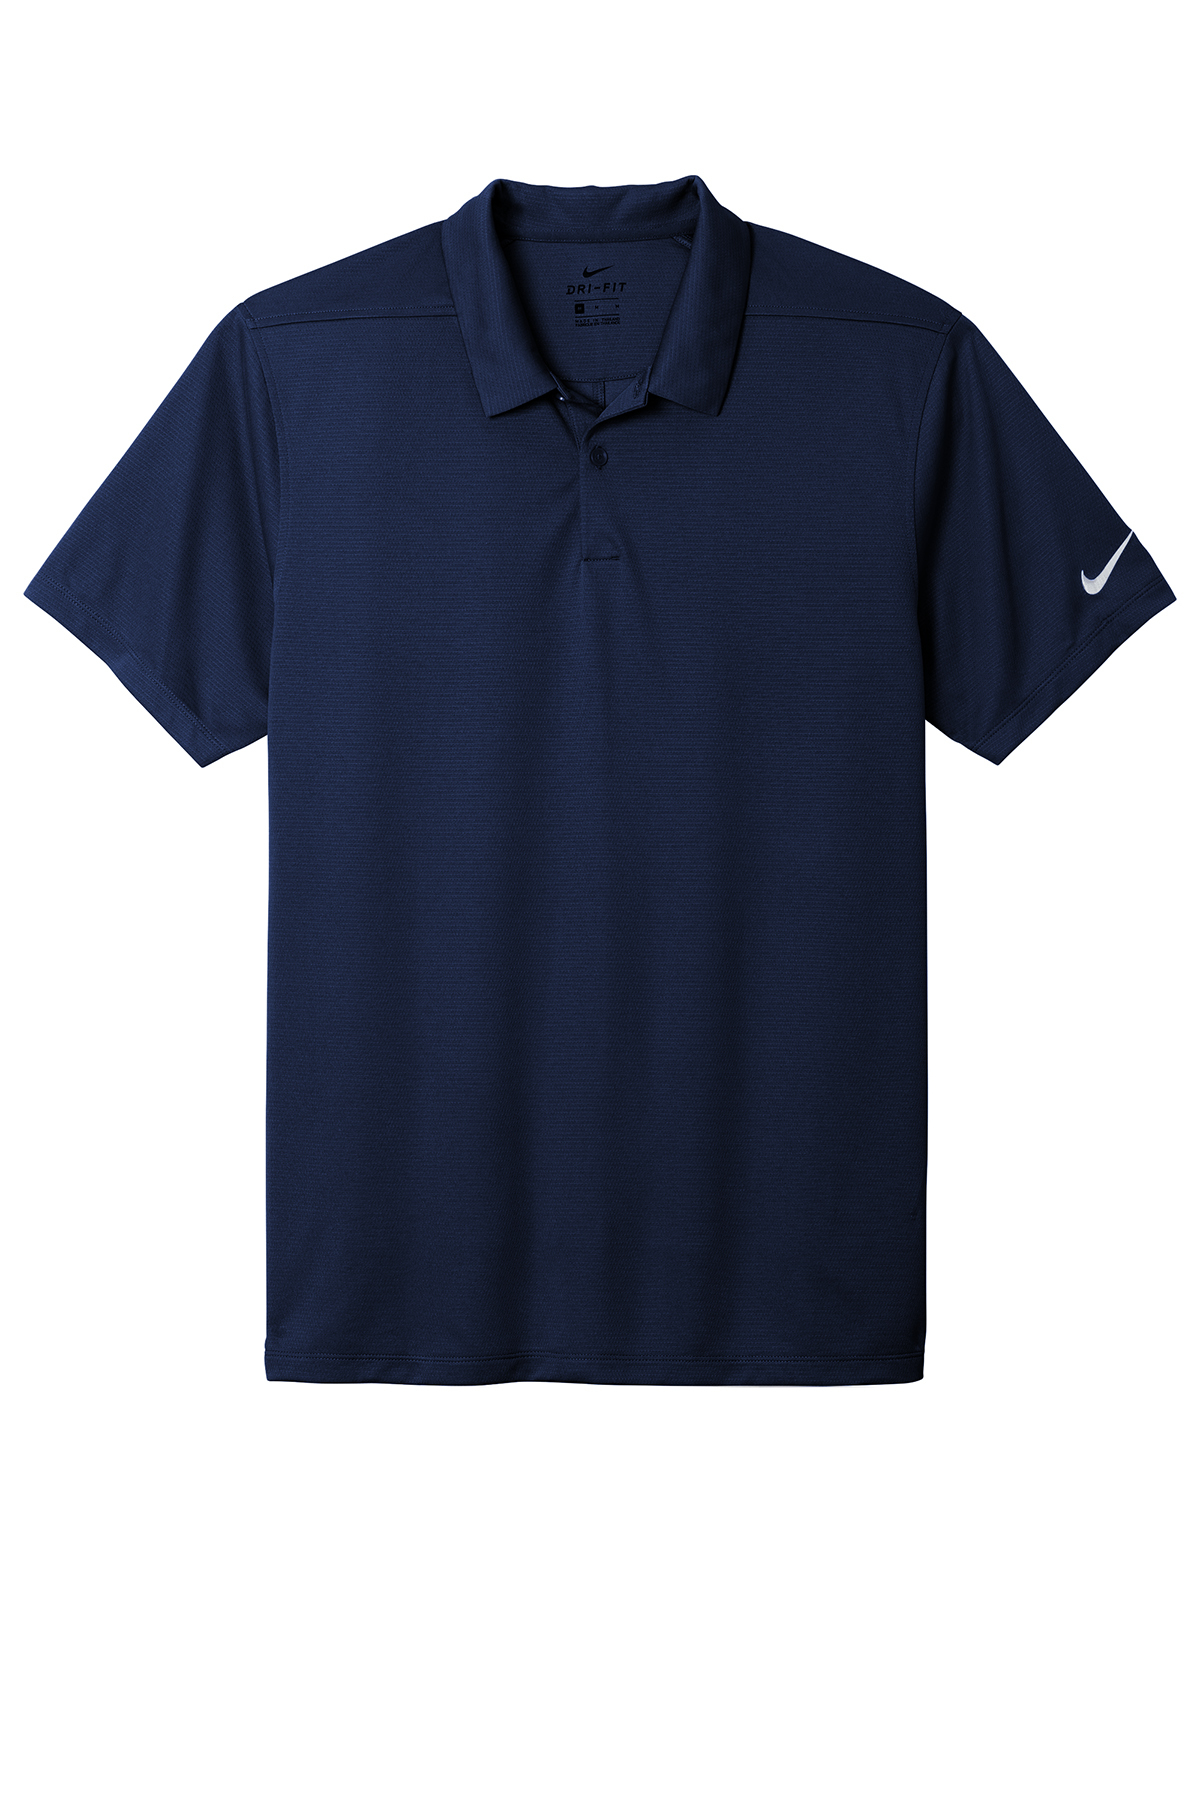 Nike Dry Essential Solid Polo | Product | Company Casuals